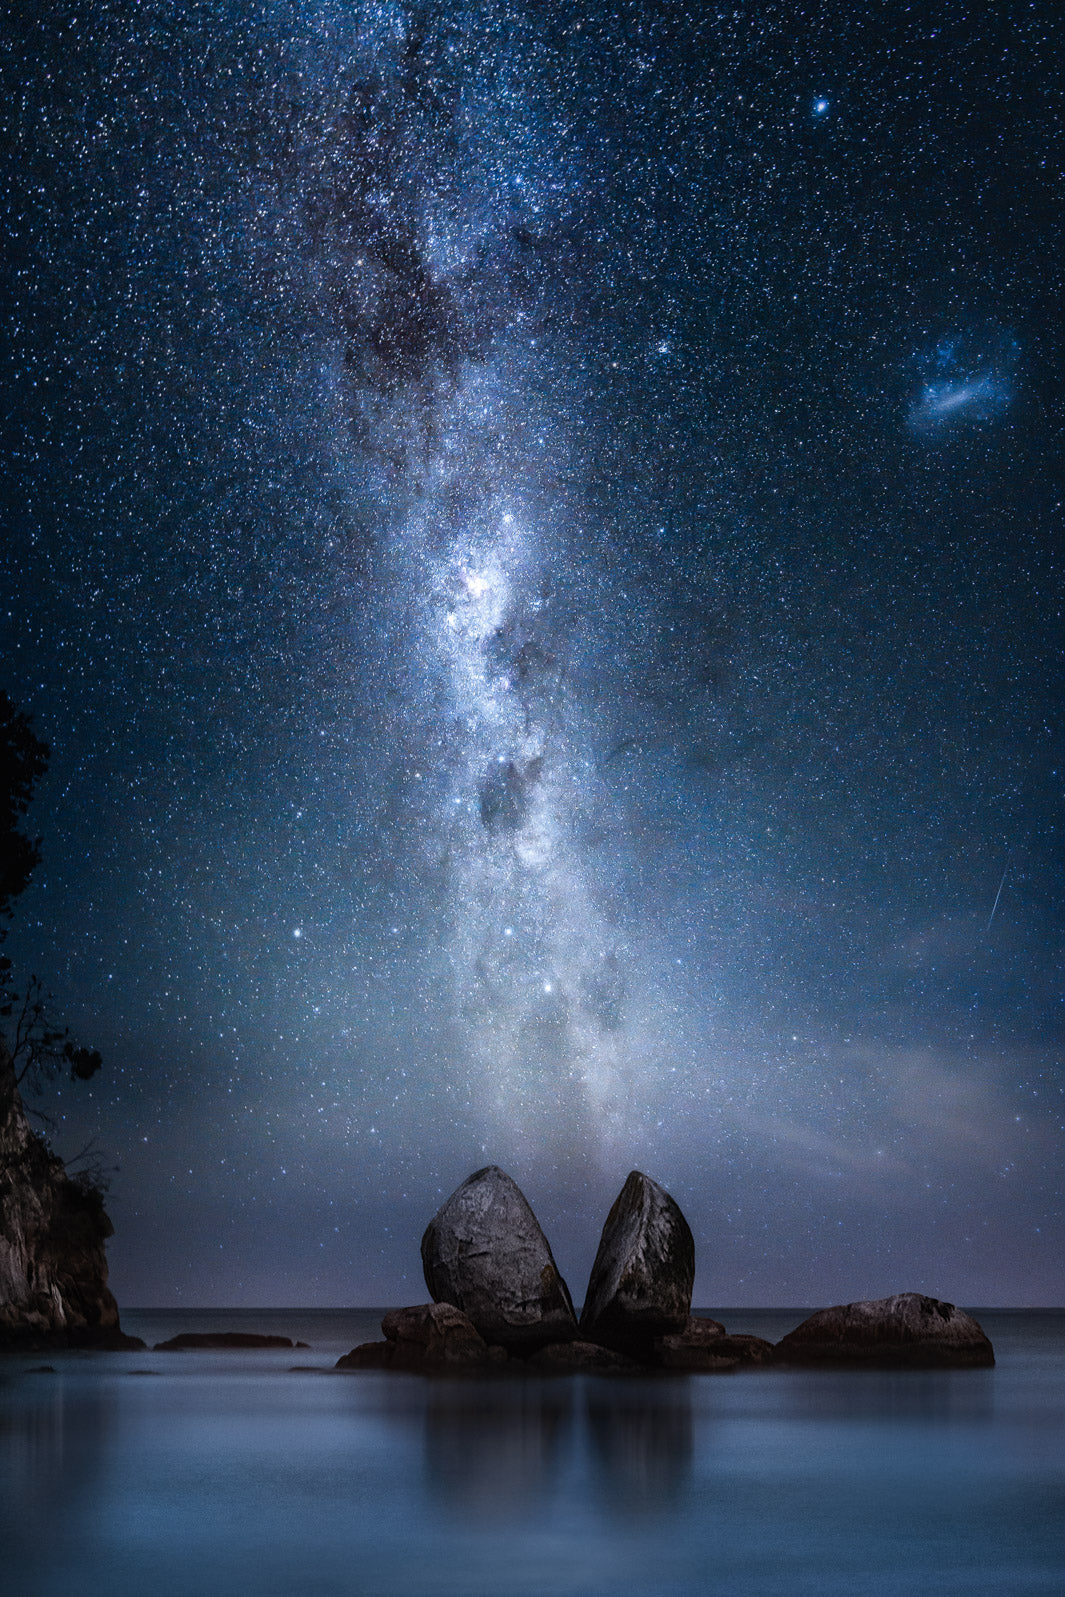 Night time astrophotography of the Milky Way and stars in the sky above Split Apple Rock, famous in New Zealand